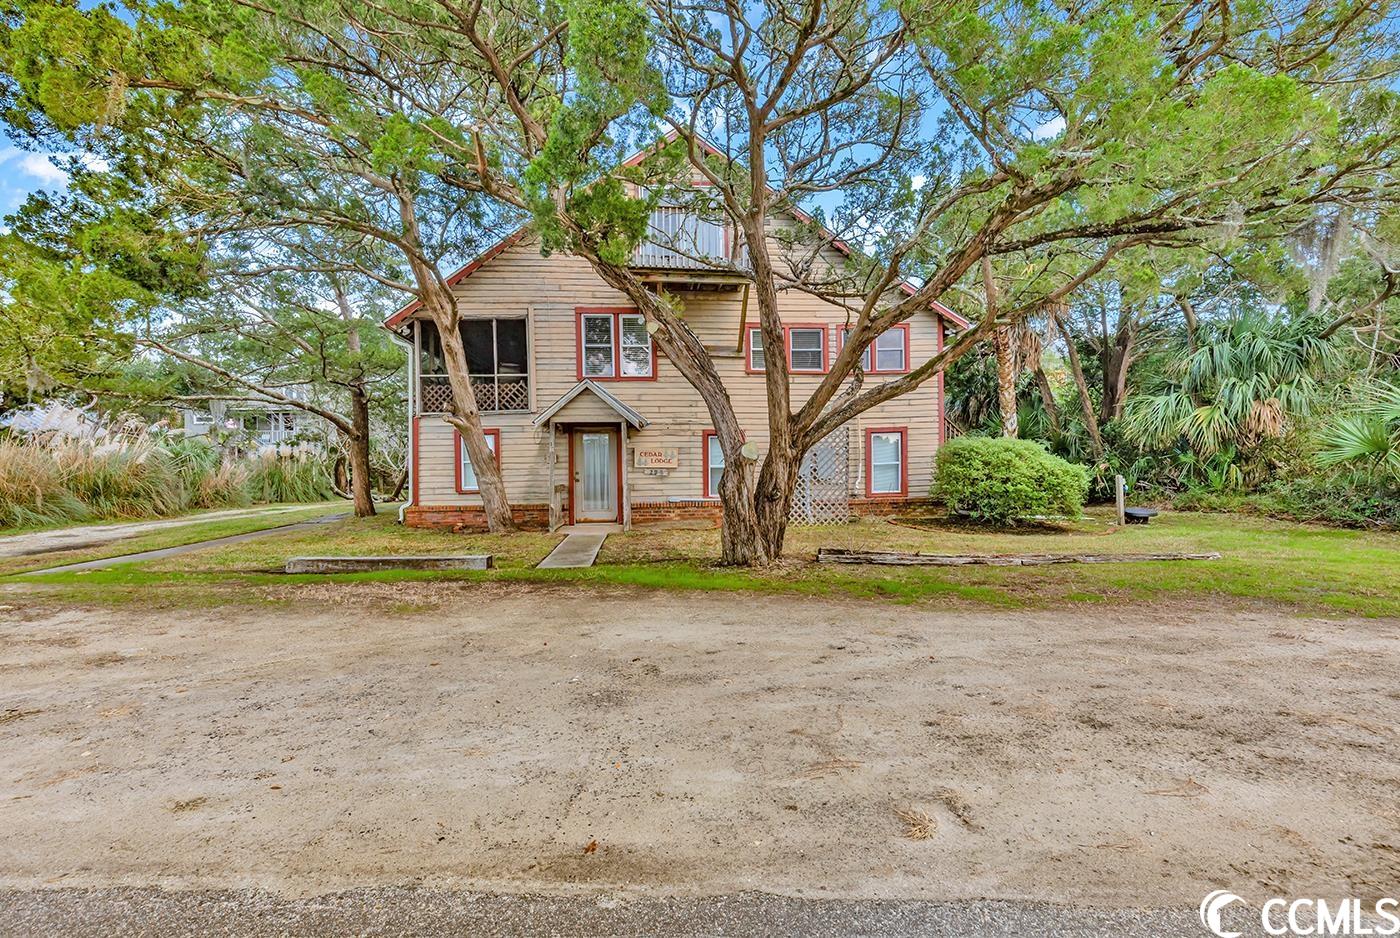 a unique offering! cedar lodge represents old pawleys island, the way it used to be! included with the sale is the creek lot across the street. the building is being sold "as is" with no representation as to the condition.  opportunities abound, one could renovate and update or tear down and start over!  as the photos show the unobstructed views are stunning of the creek and sunsets! ease through a maritime forest to the convenient beach access. there is a permanent driveway easement to the north of the house. the east side of atlantic is .11 acres and the west side is 1.48 acres.